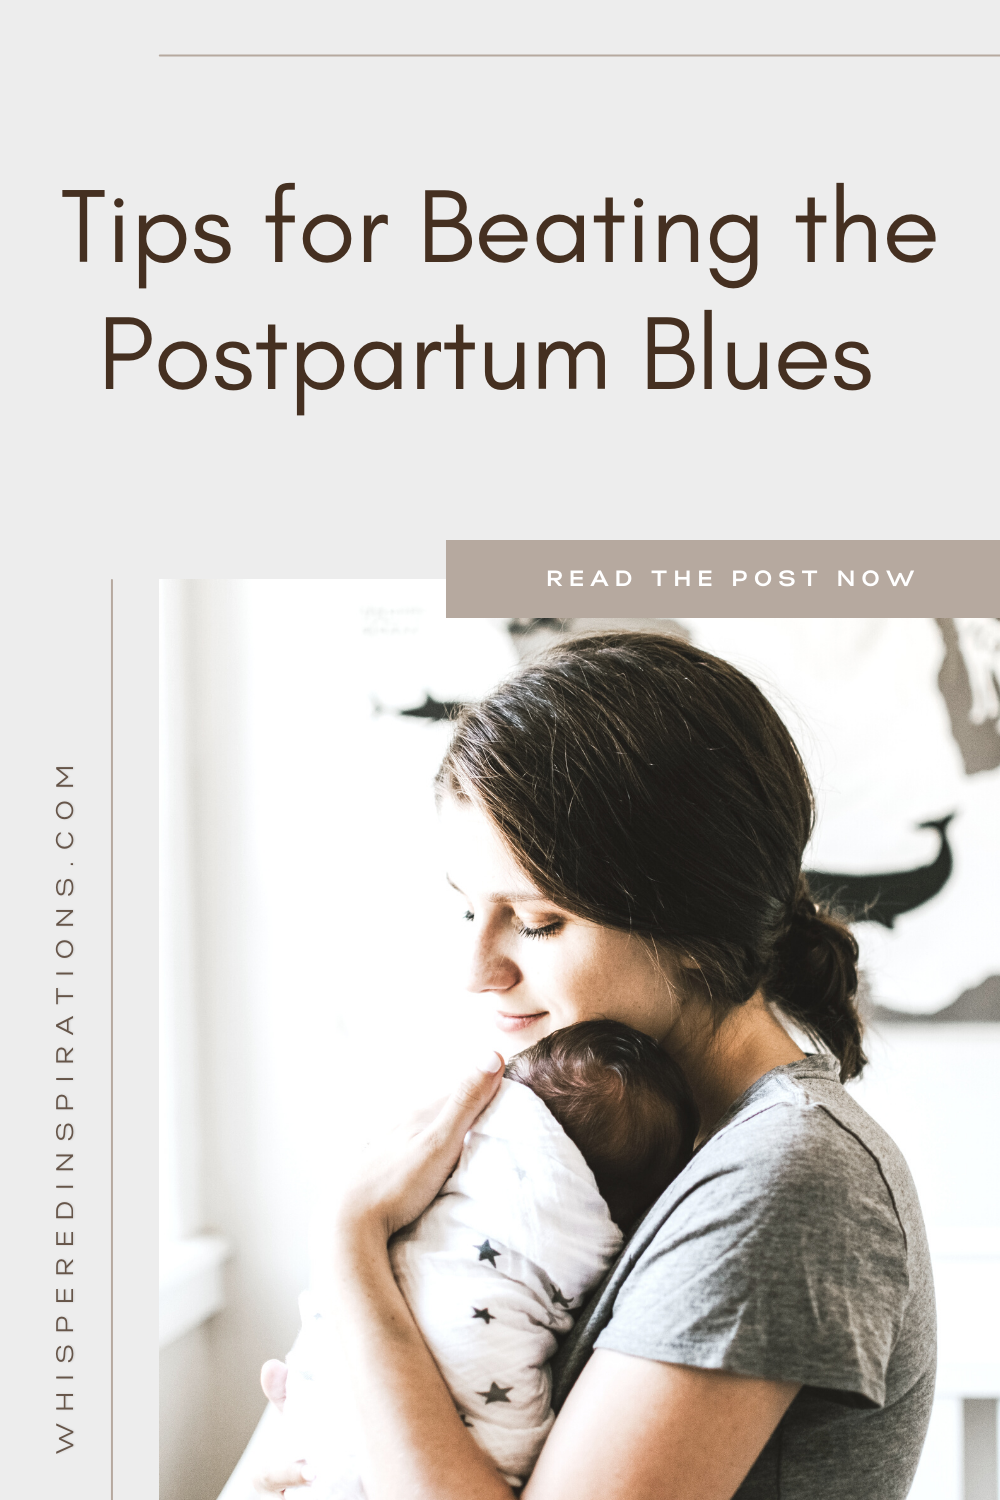 Mother and child are pictured. Mother is peaceful but, solemn. This article covers tips for beating the postpartum blues. 